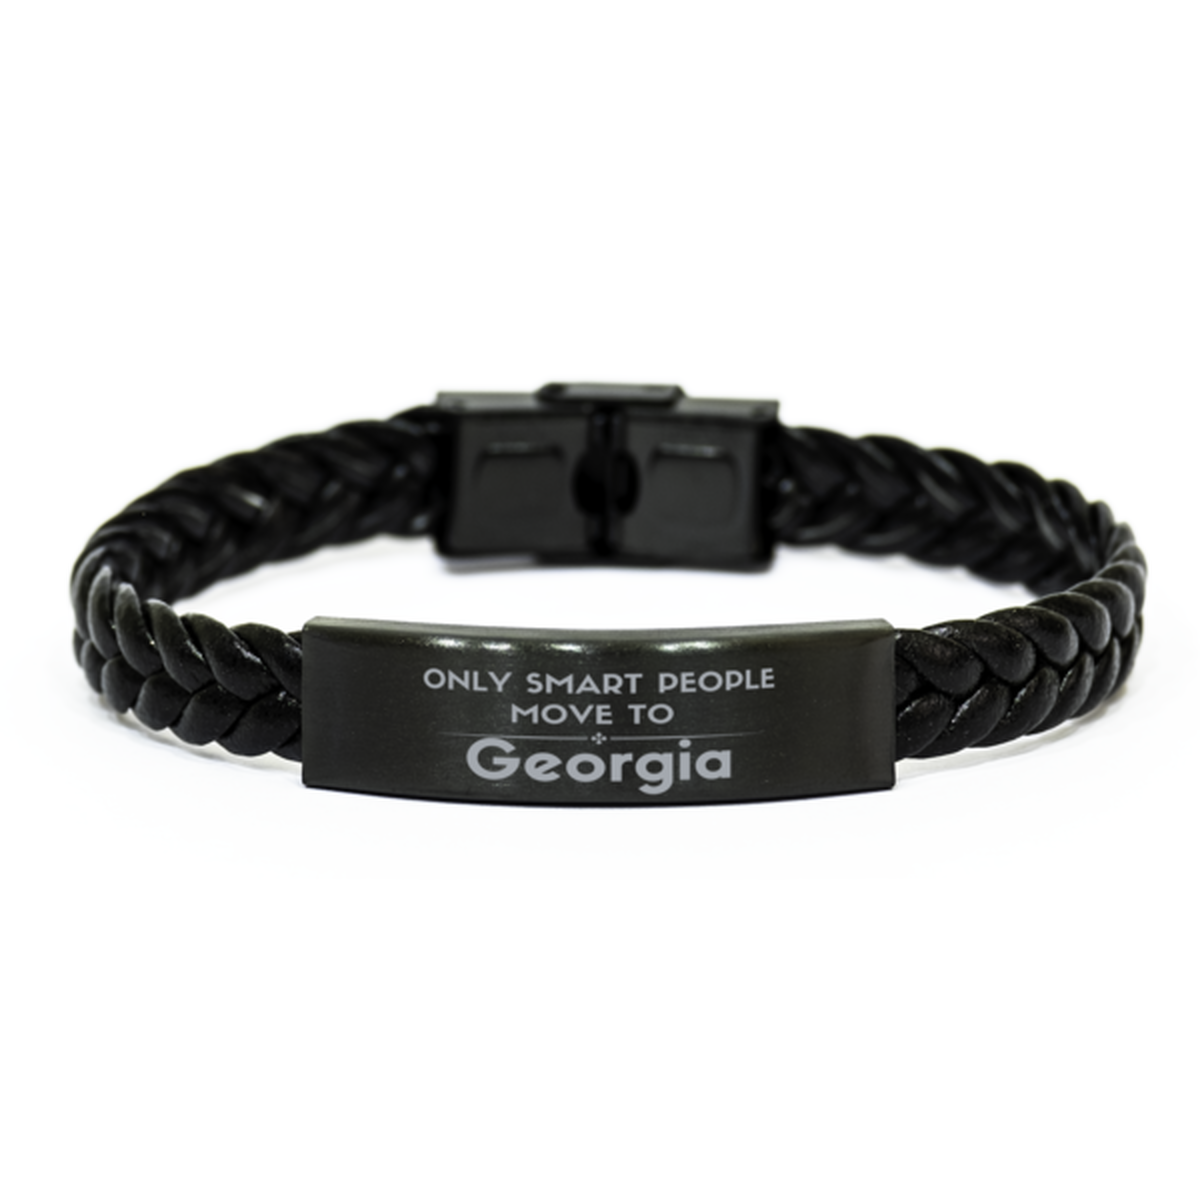 Only smart people move to Georgia Braided Leather Bracelet, Gag Gifts For Georgia, Move to Georgia Gifts for Friends Coworker Funny Saying Quote